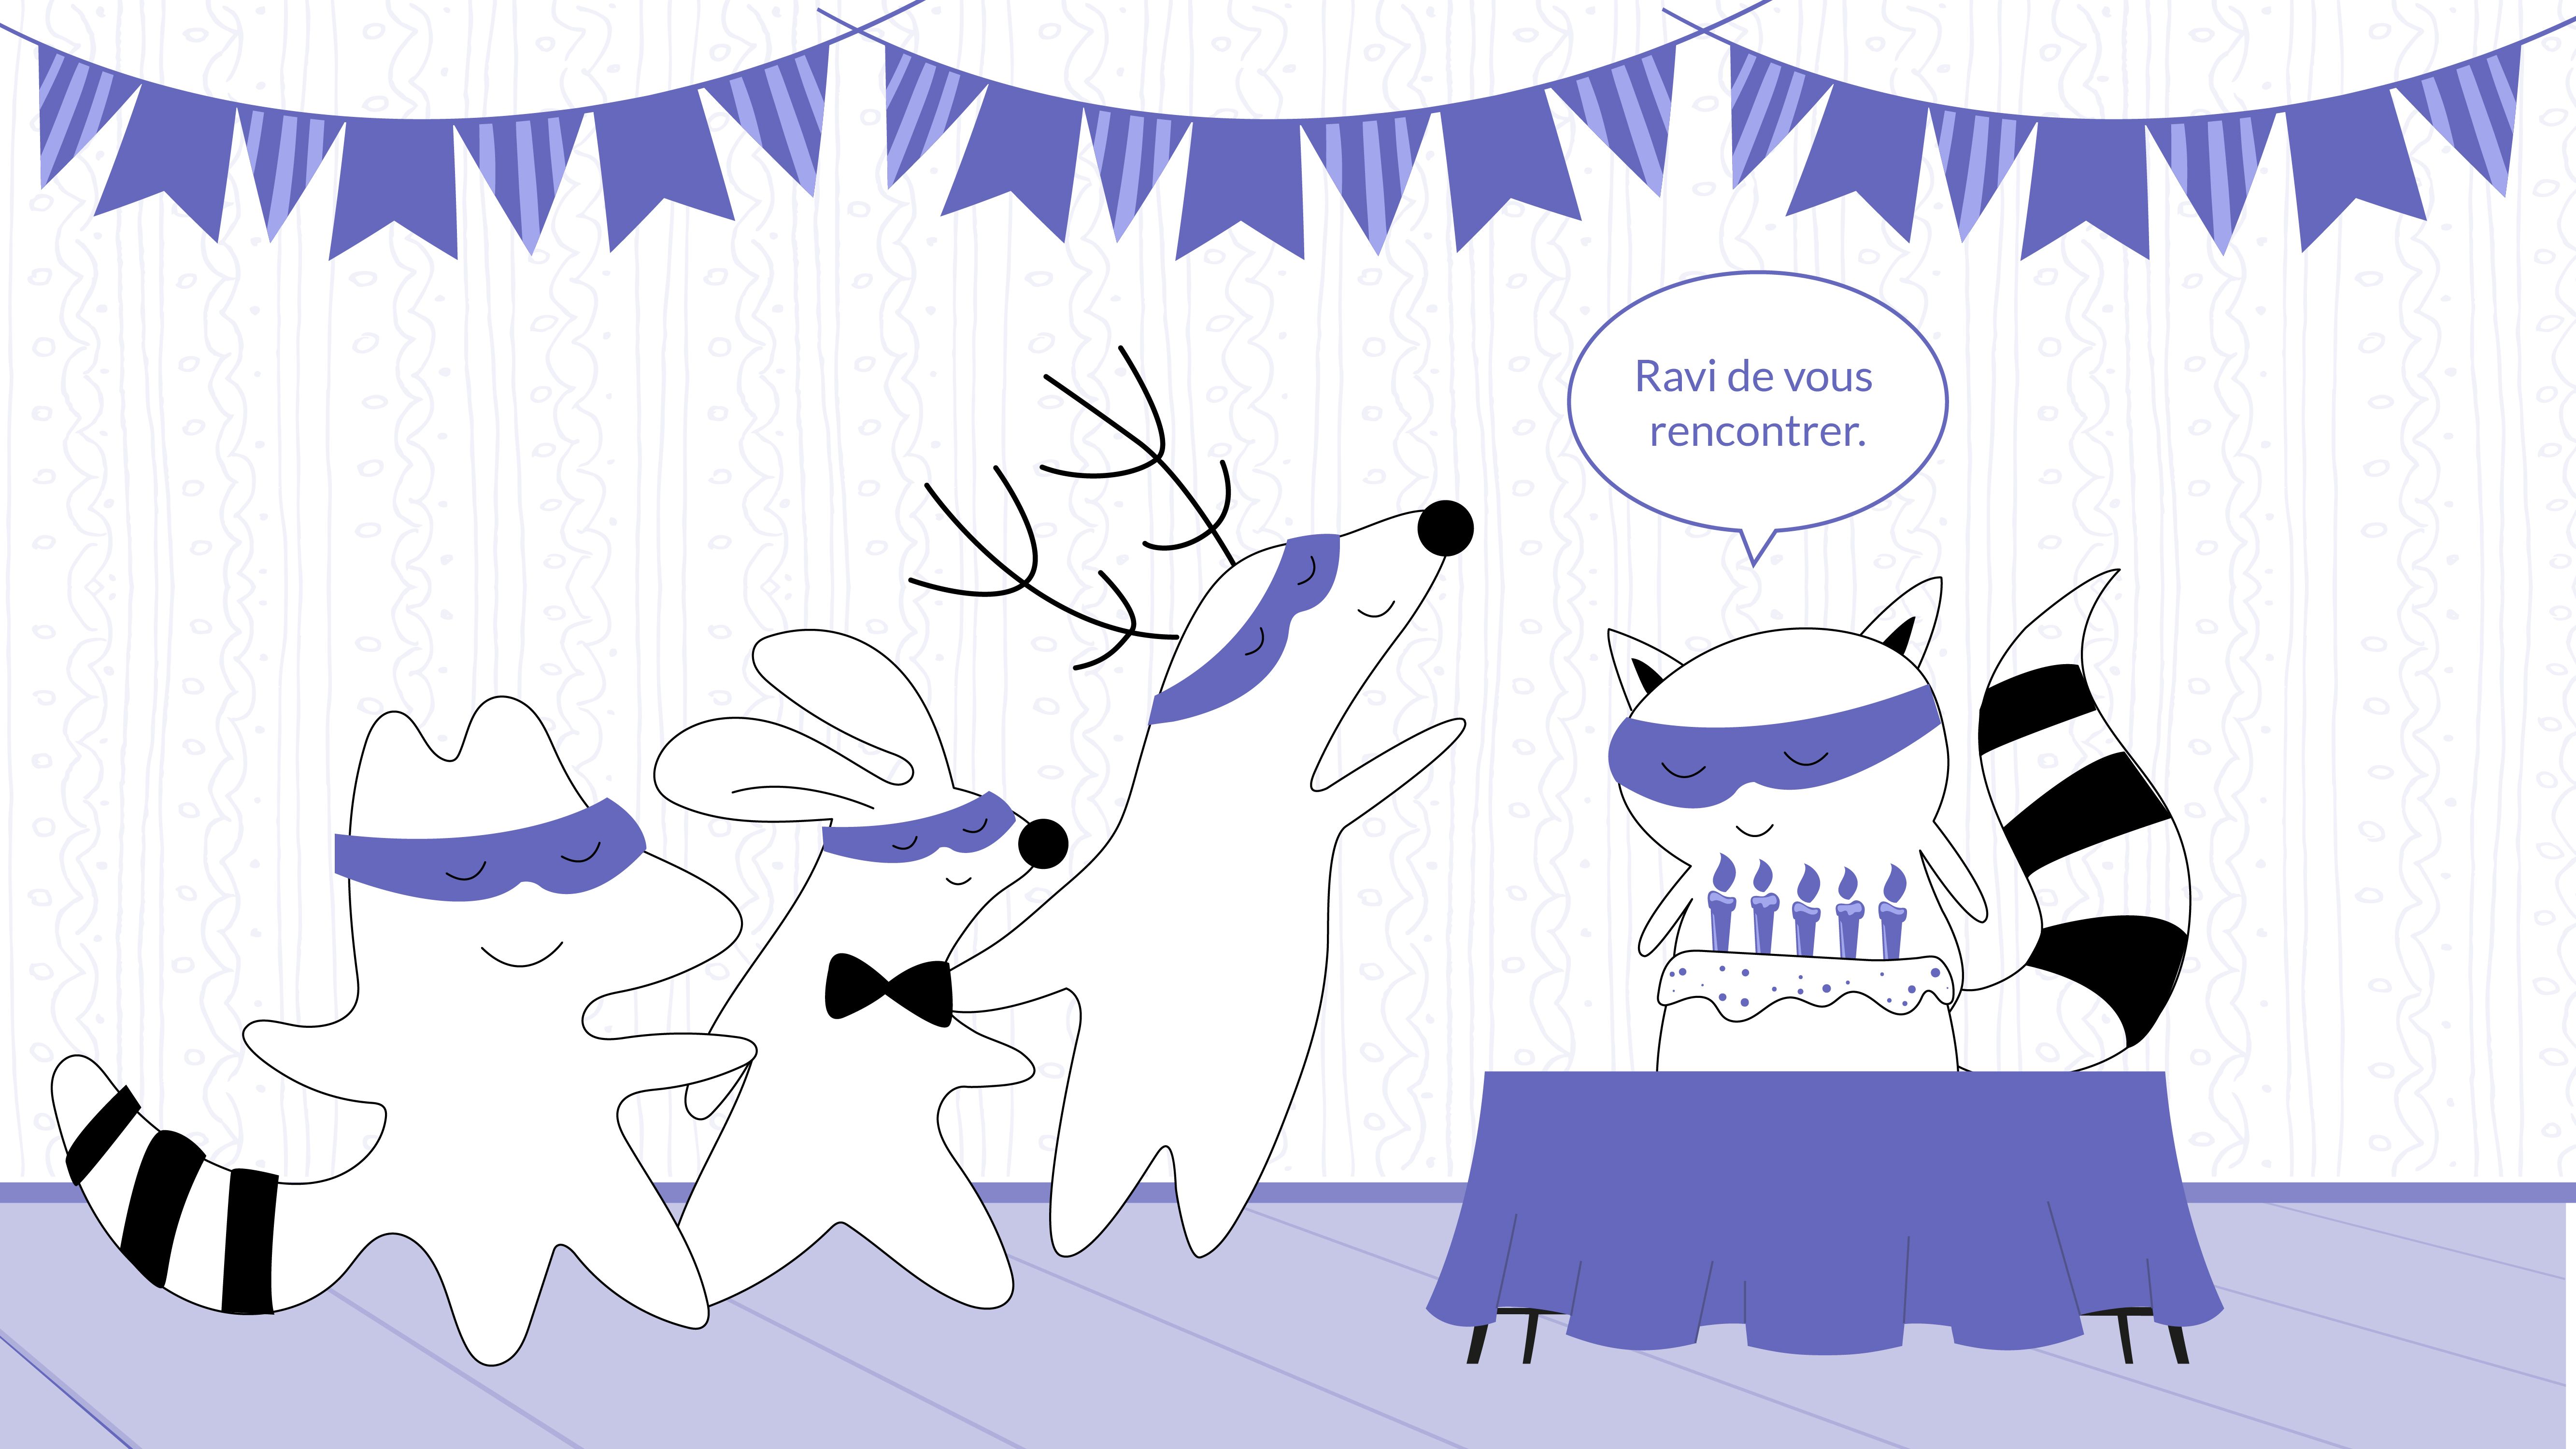 Benji meets Soren’s friends, Pocky and Iggy, at his birthday party, saying to them, “Ravi de vous rencontrer.”